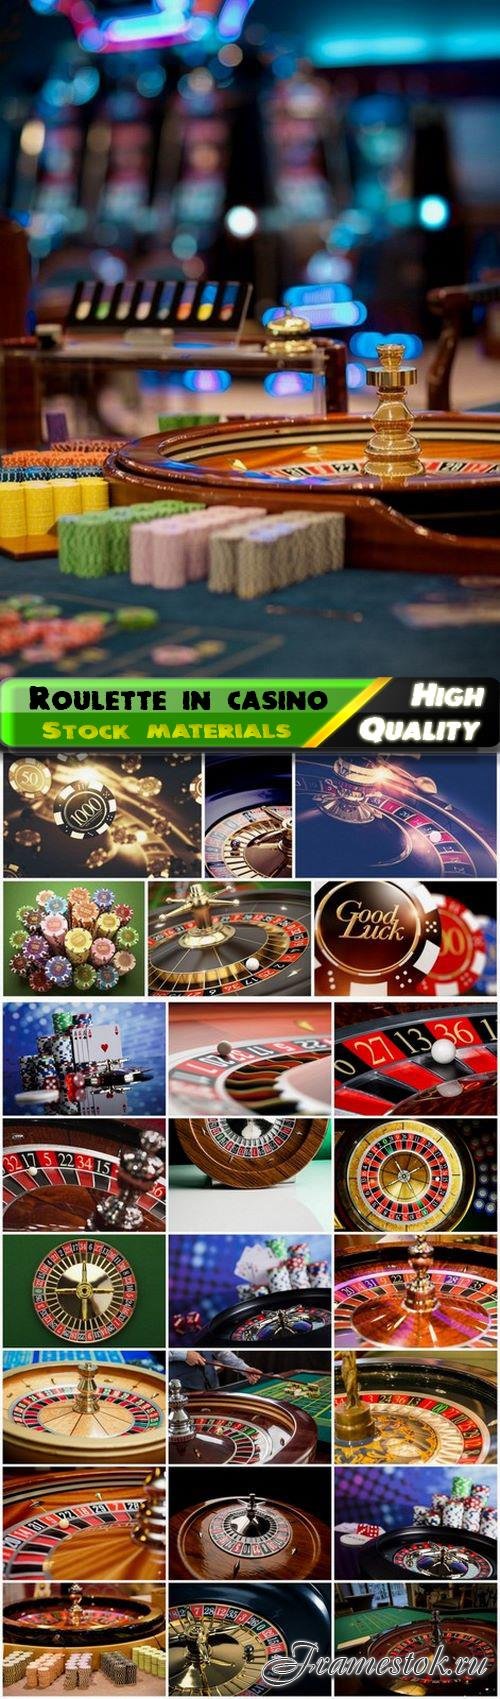 Games of chance at roulette in casino 25 HQ Jpg